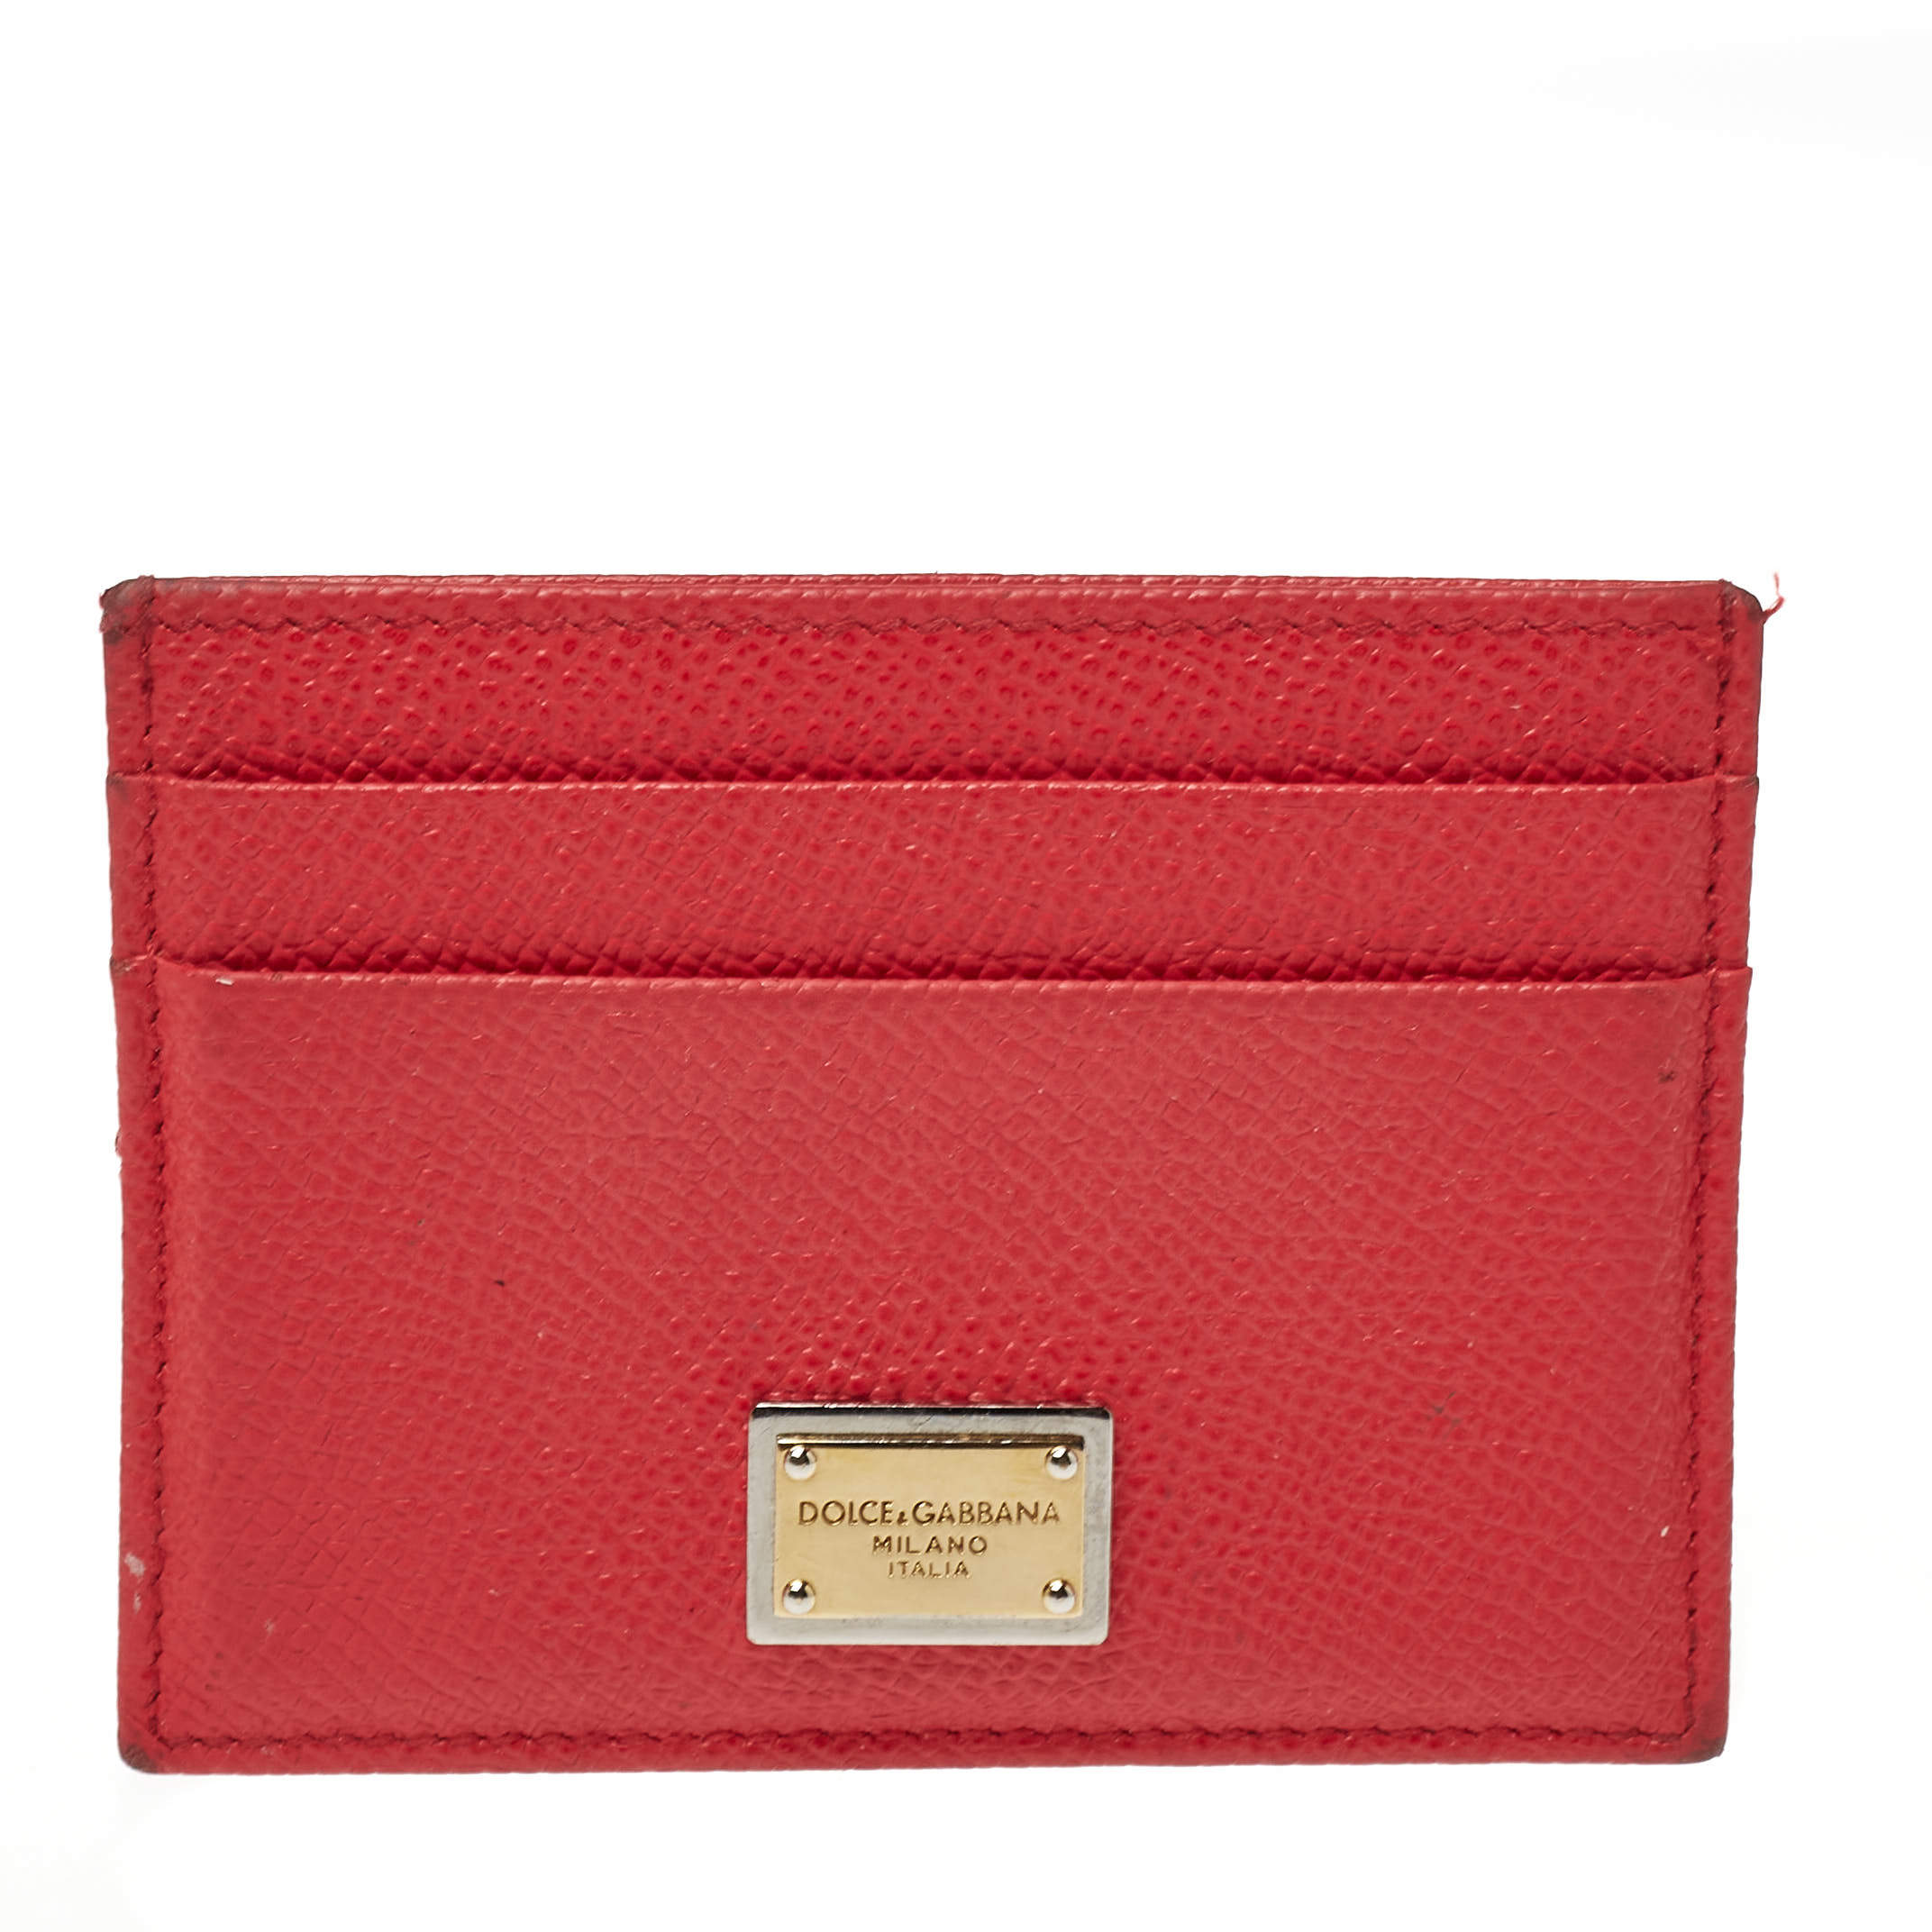 Dolce & Gabbana Coral Pink Grained Leather Card Holder